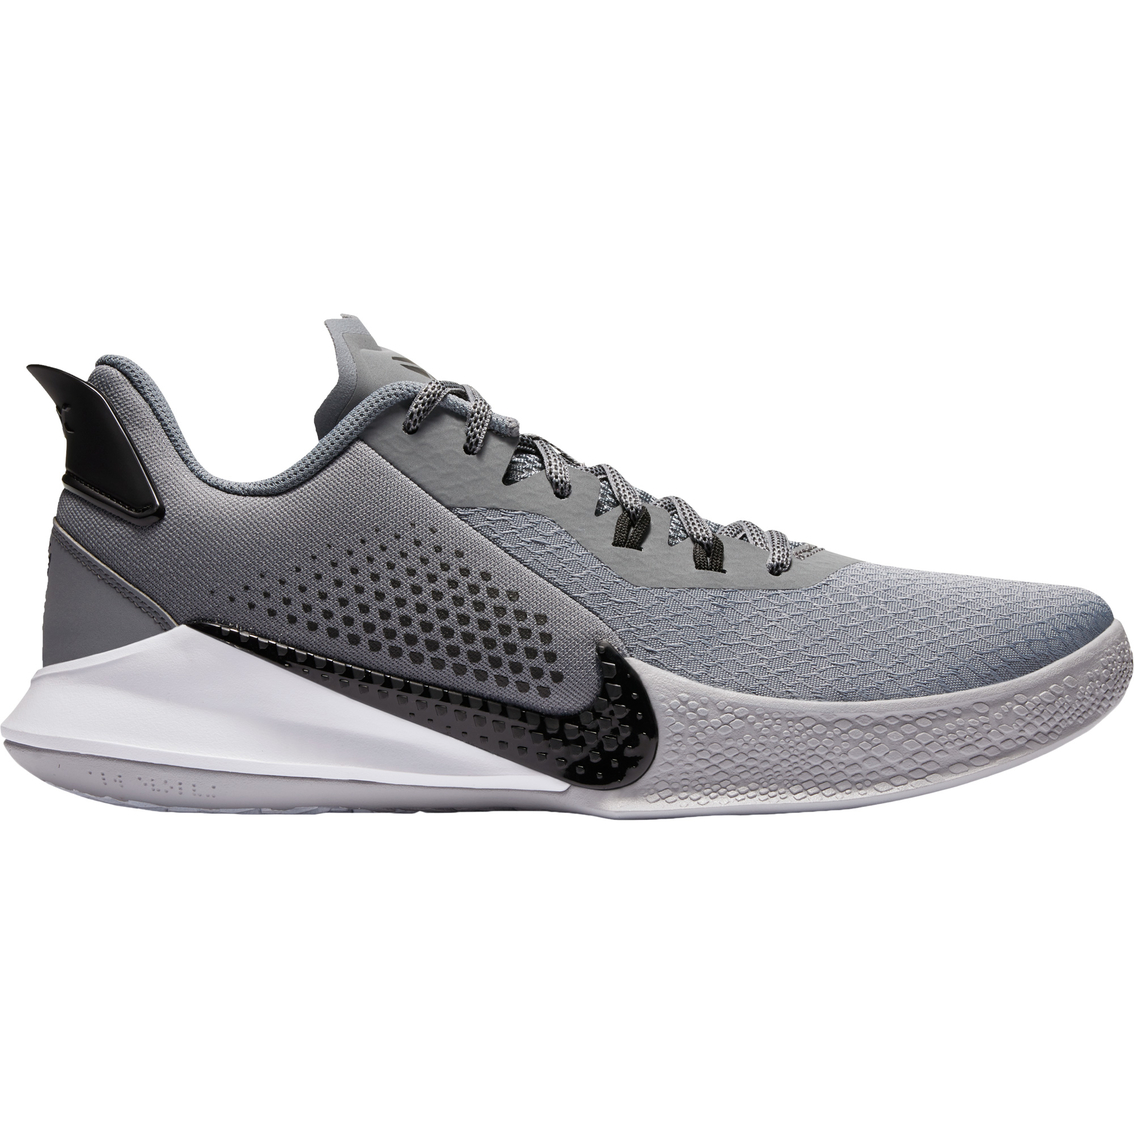 Nike Men's Mamba Fury Shoes | Men's Athletic Shoes | Father's Day Shop ...